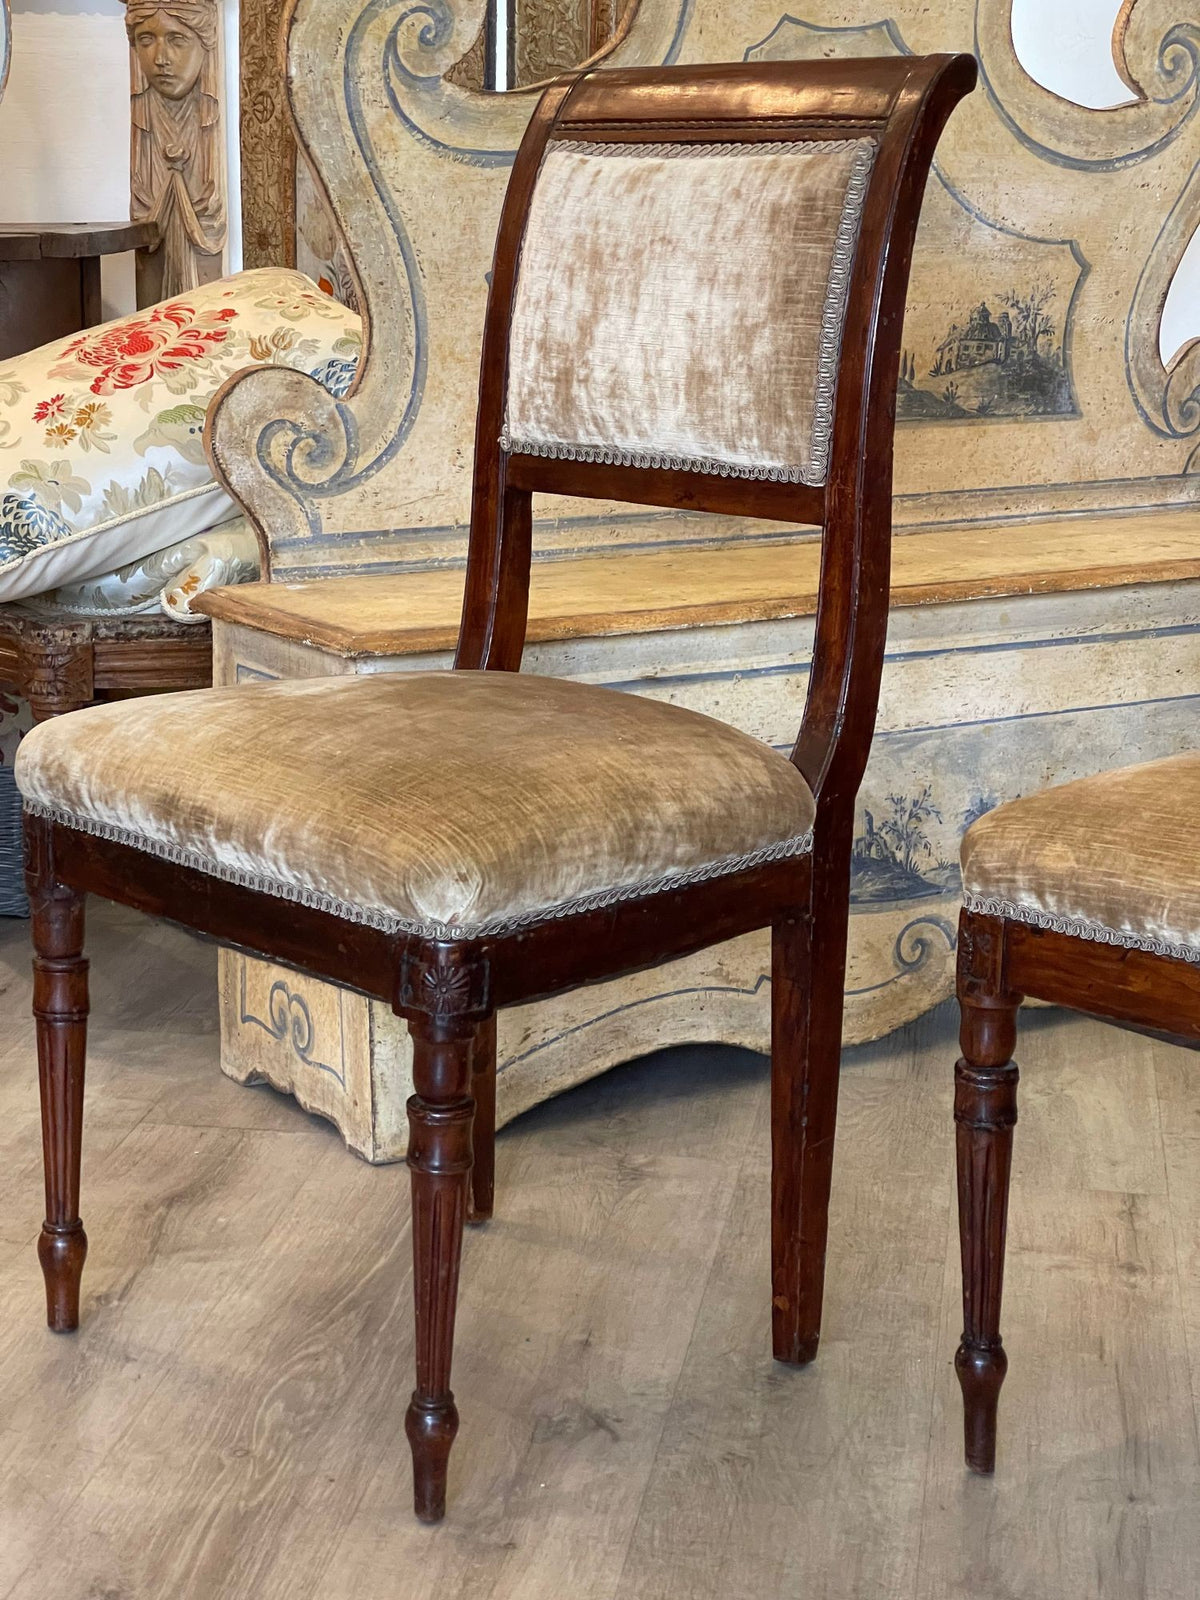 LATE 18TH - EARLY 19TH CENTURY PAIR OF FRENCH DIRECTOIRE MAHOGANY SIDE CHAIRS